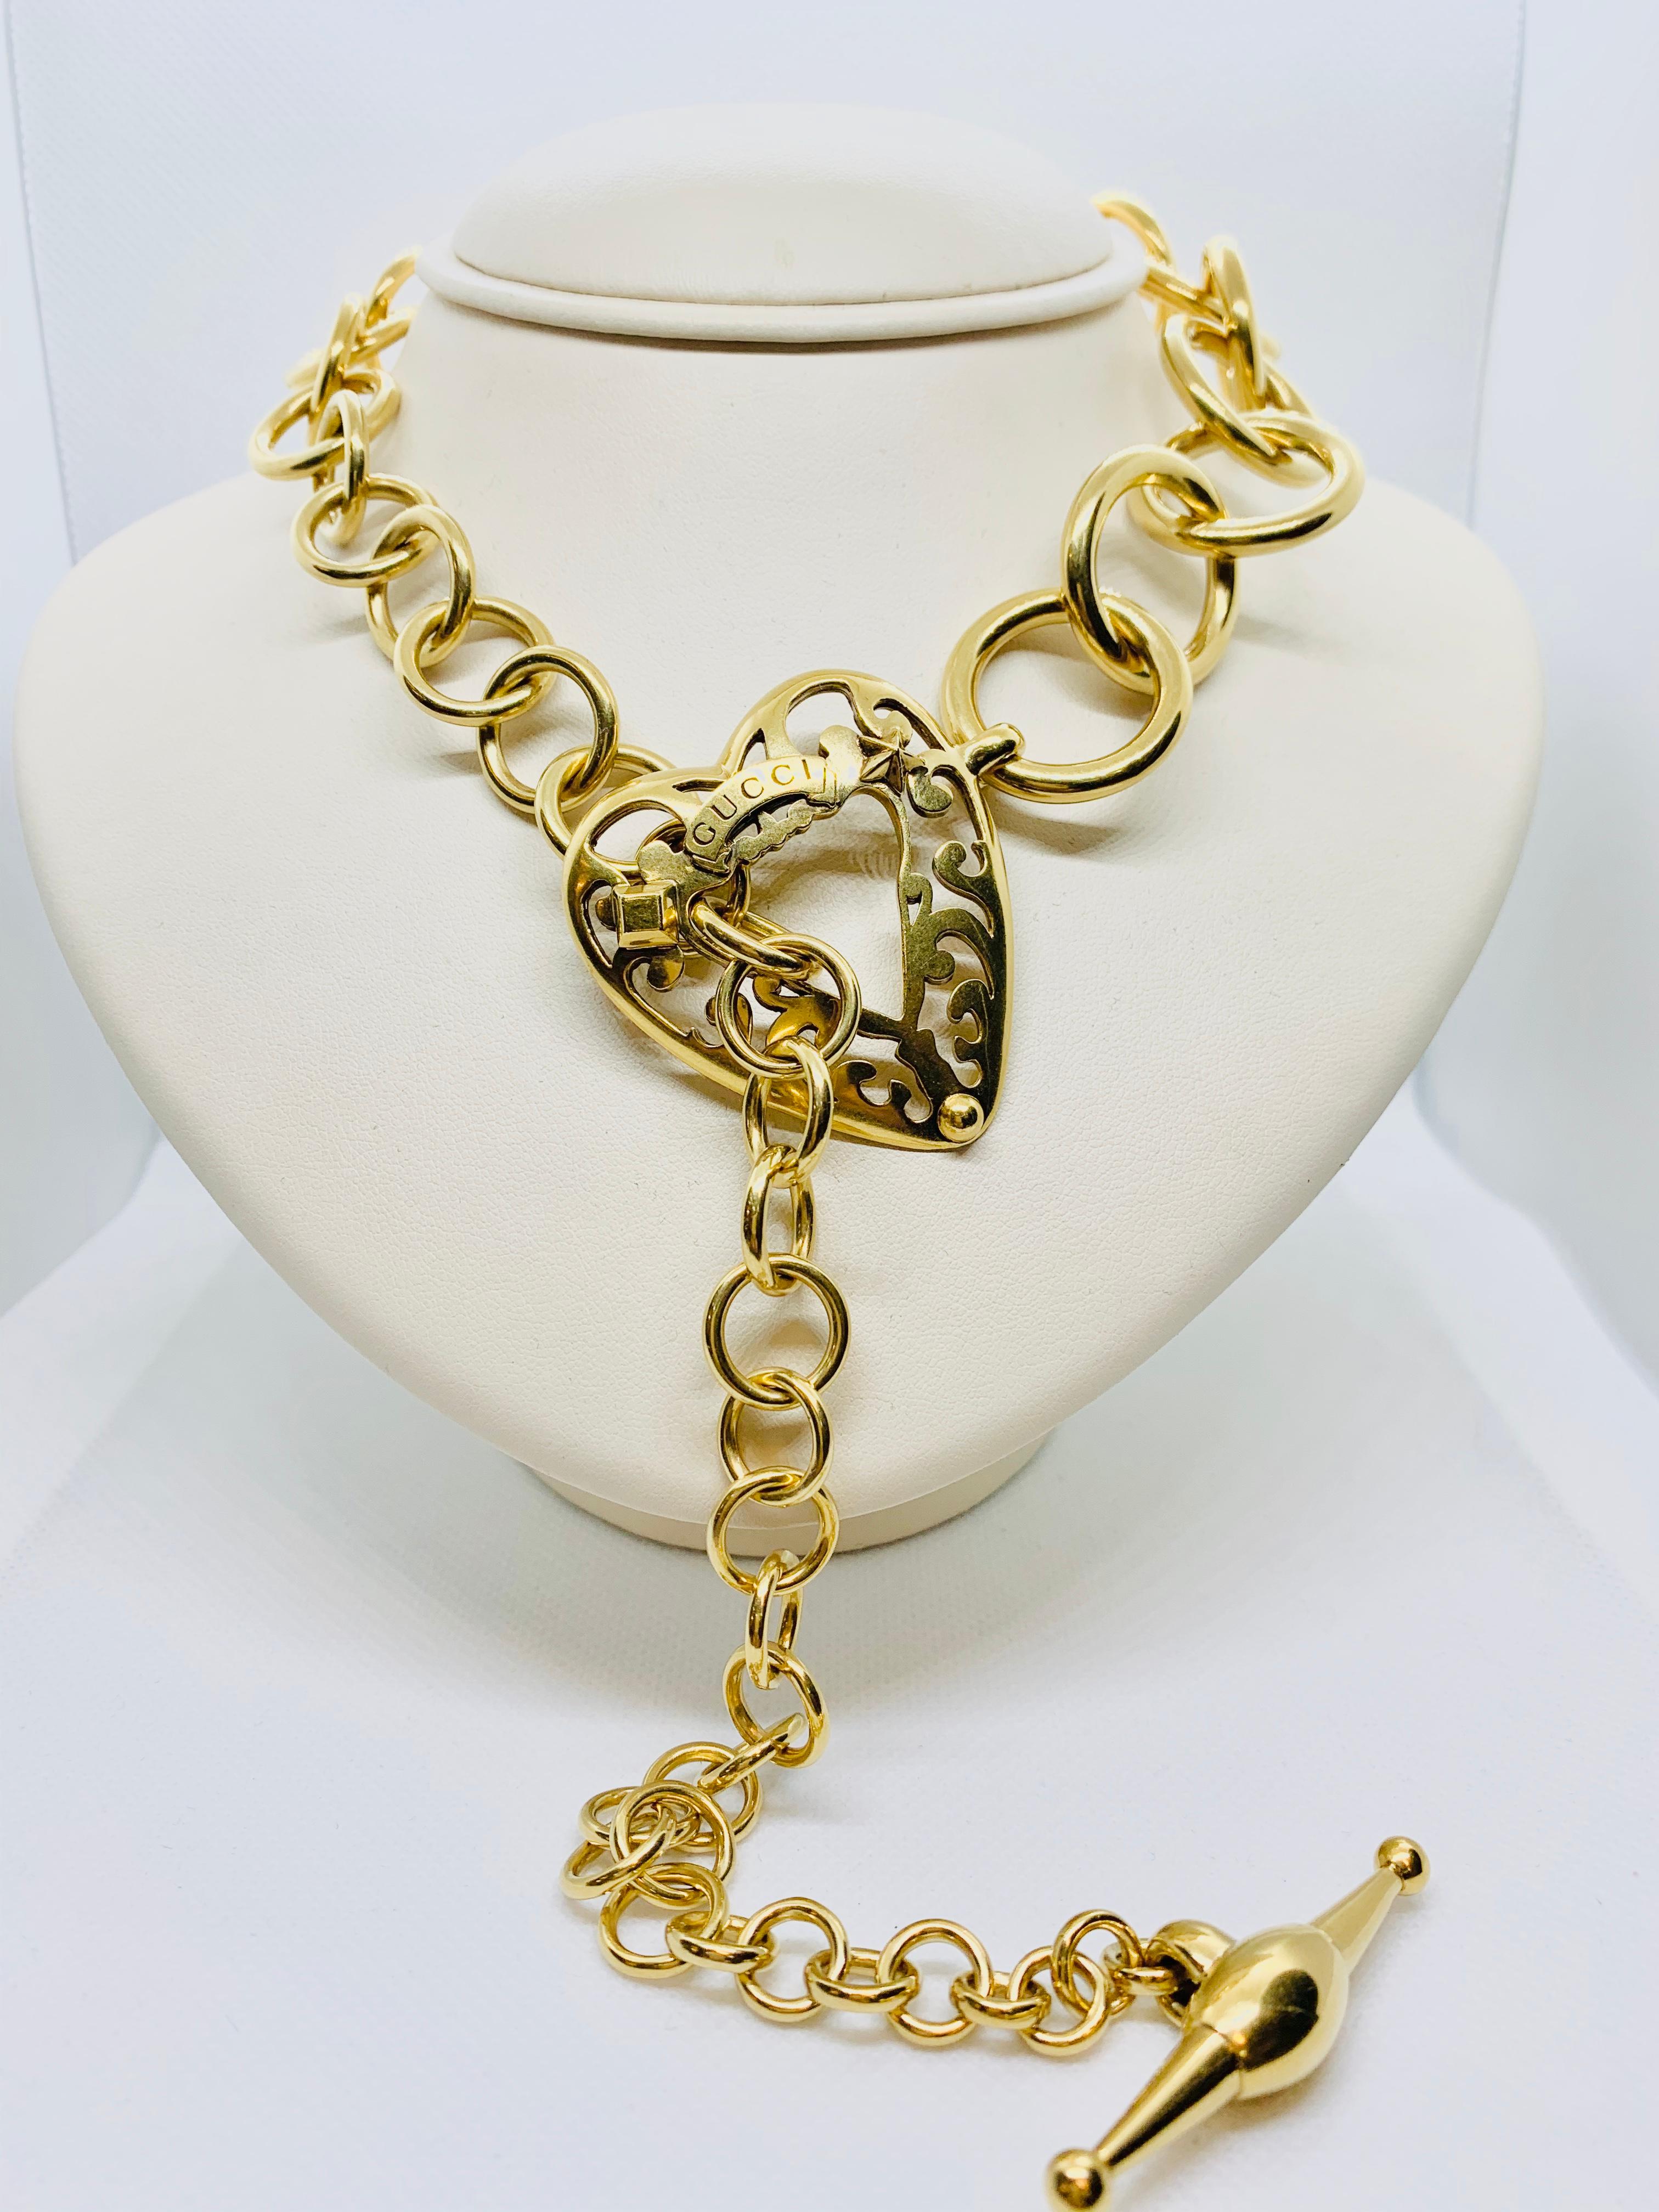 Signed Gucci 18 Karat Gold Link Toggle Necklace with Heart Shaped Center Piece 7